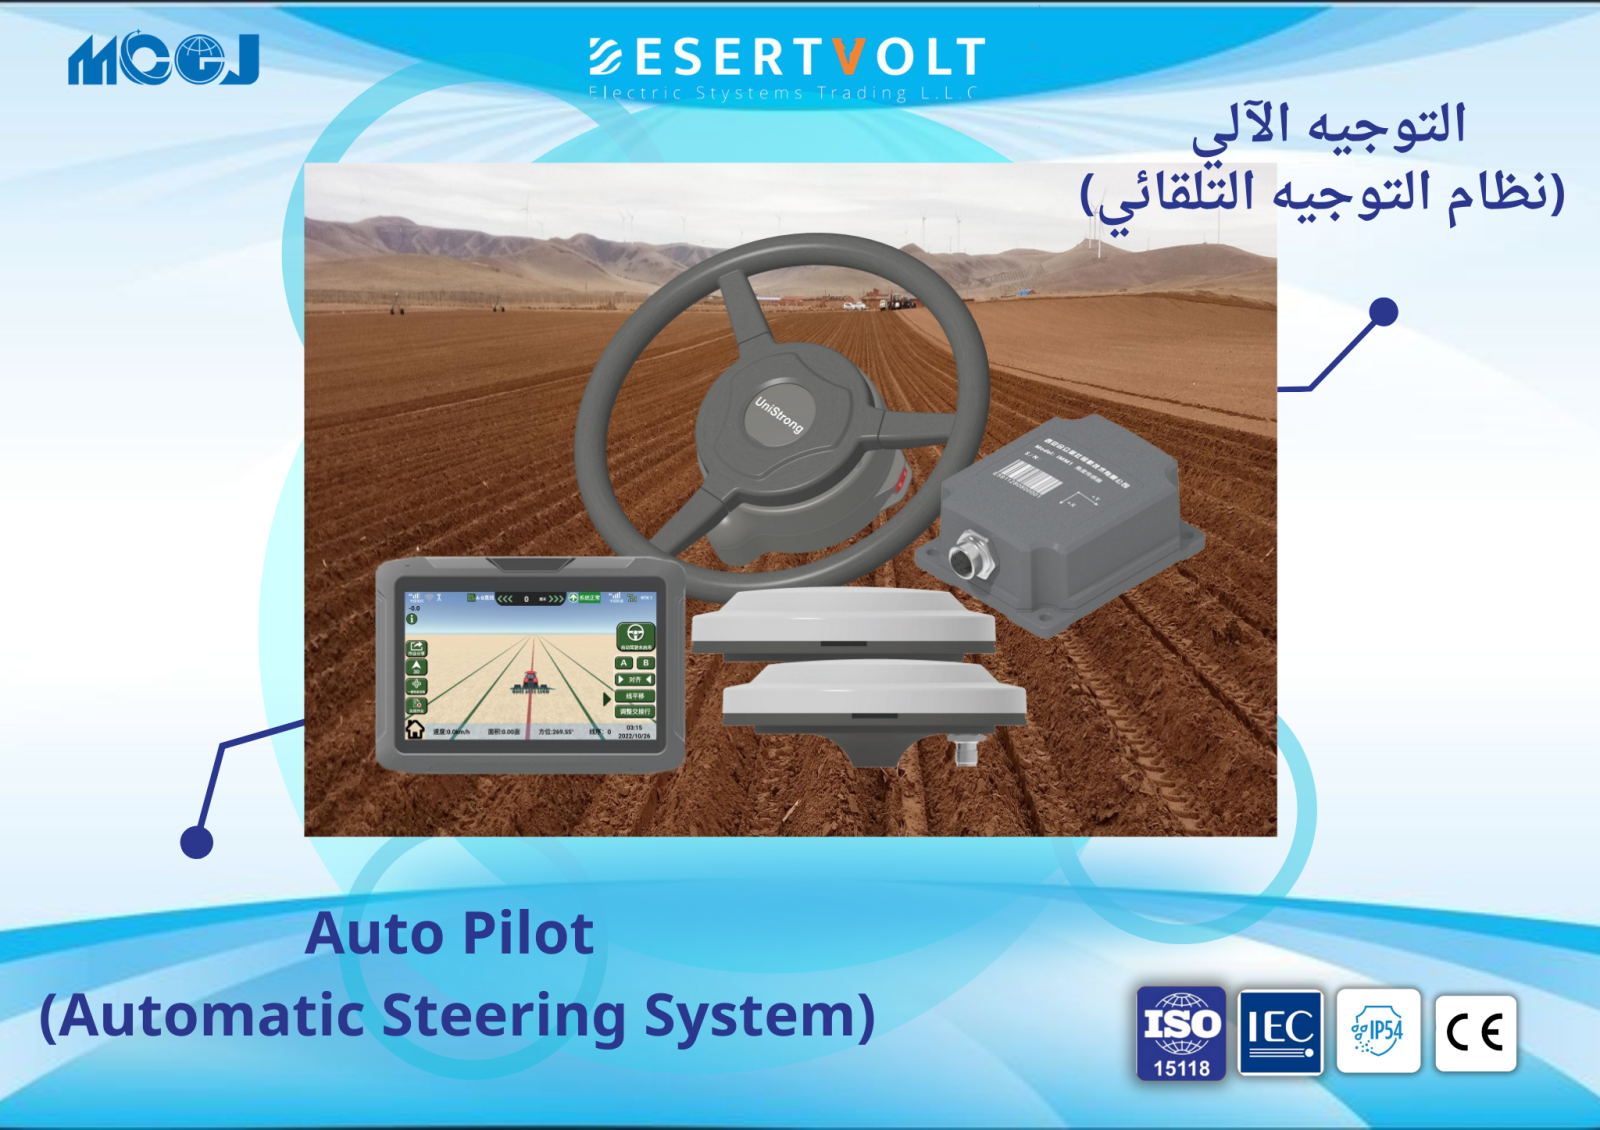 Auto Pilot (Automatic Steering System)